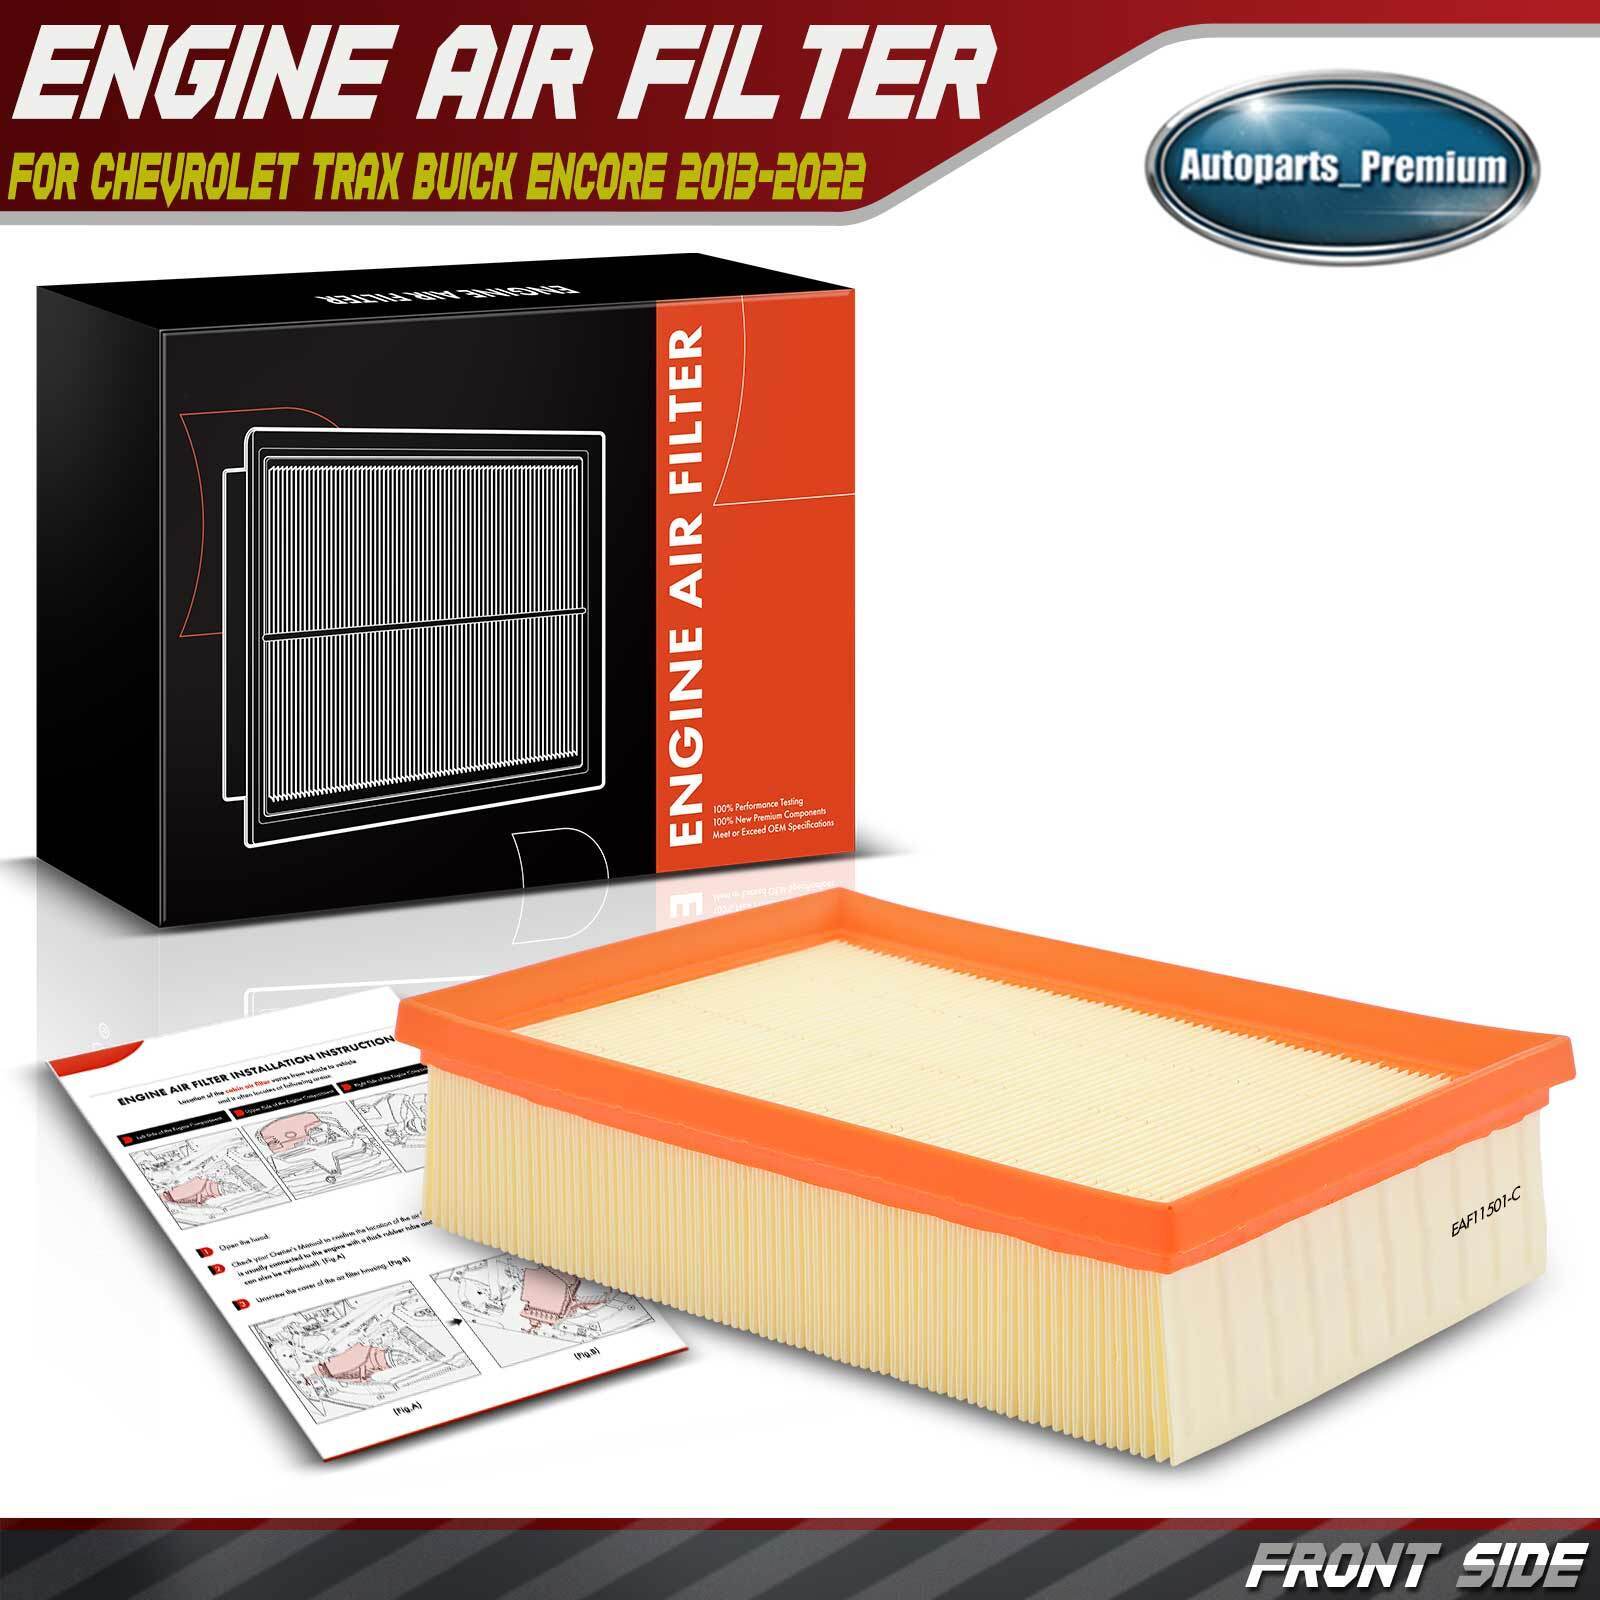 Engine Air Filter for Chevrolet Trax 2013-2022 Buick Encore 1.4L Flexible Panel